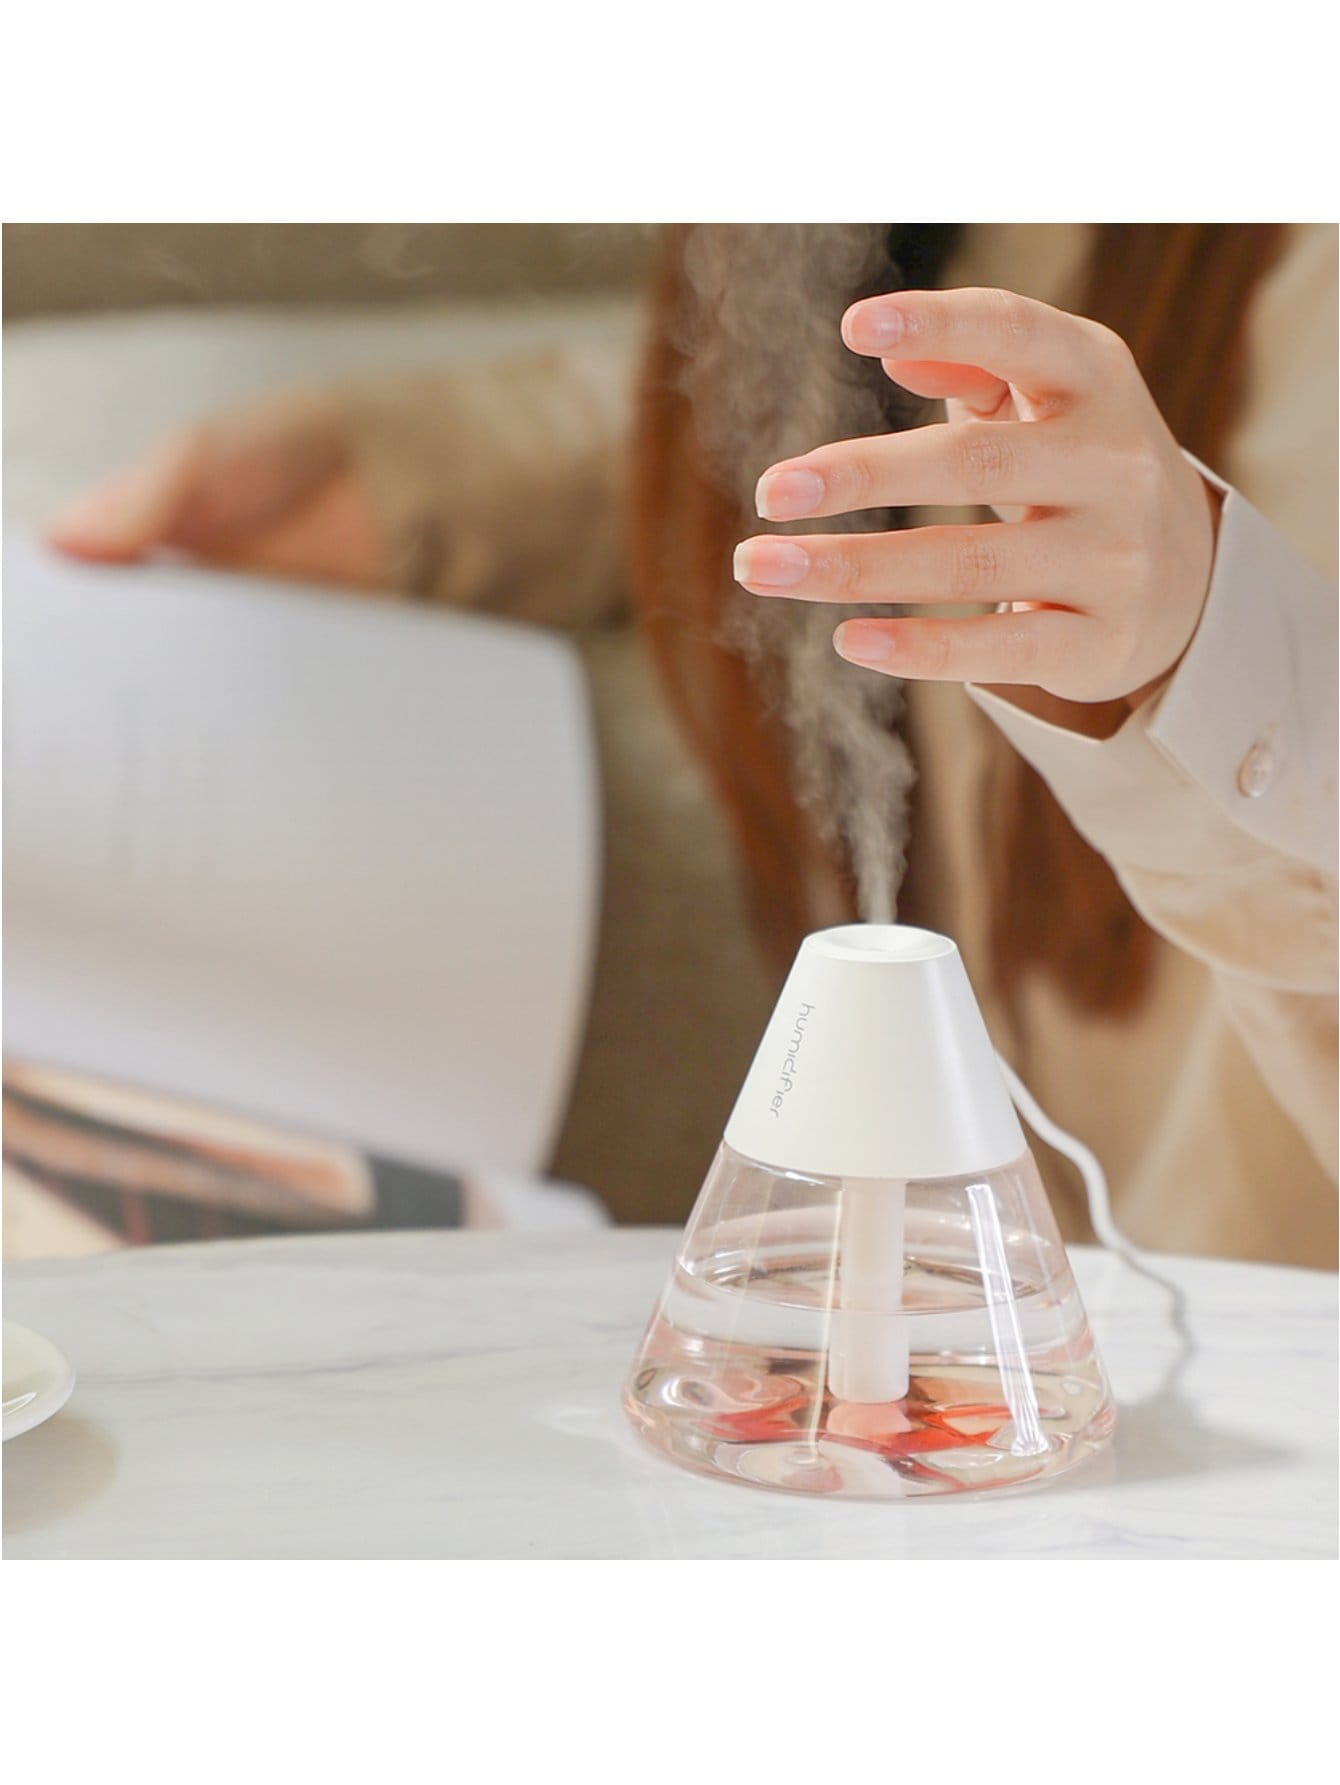 1pc Mini Volcano-shaped Electric Desktop Humidifier For Bedroom, Living Room, Office With Auto Power-off Function And Double Spray-White-5